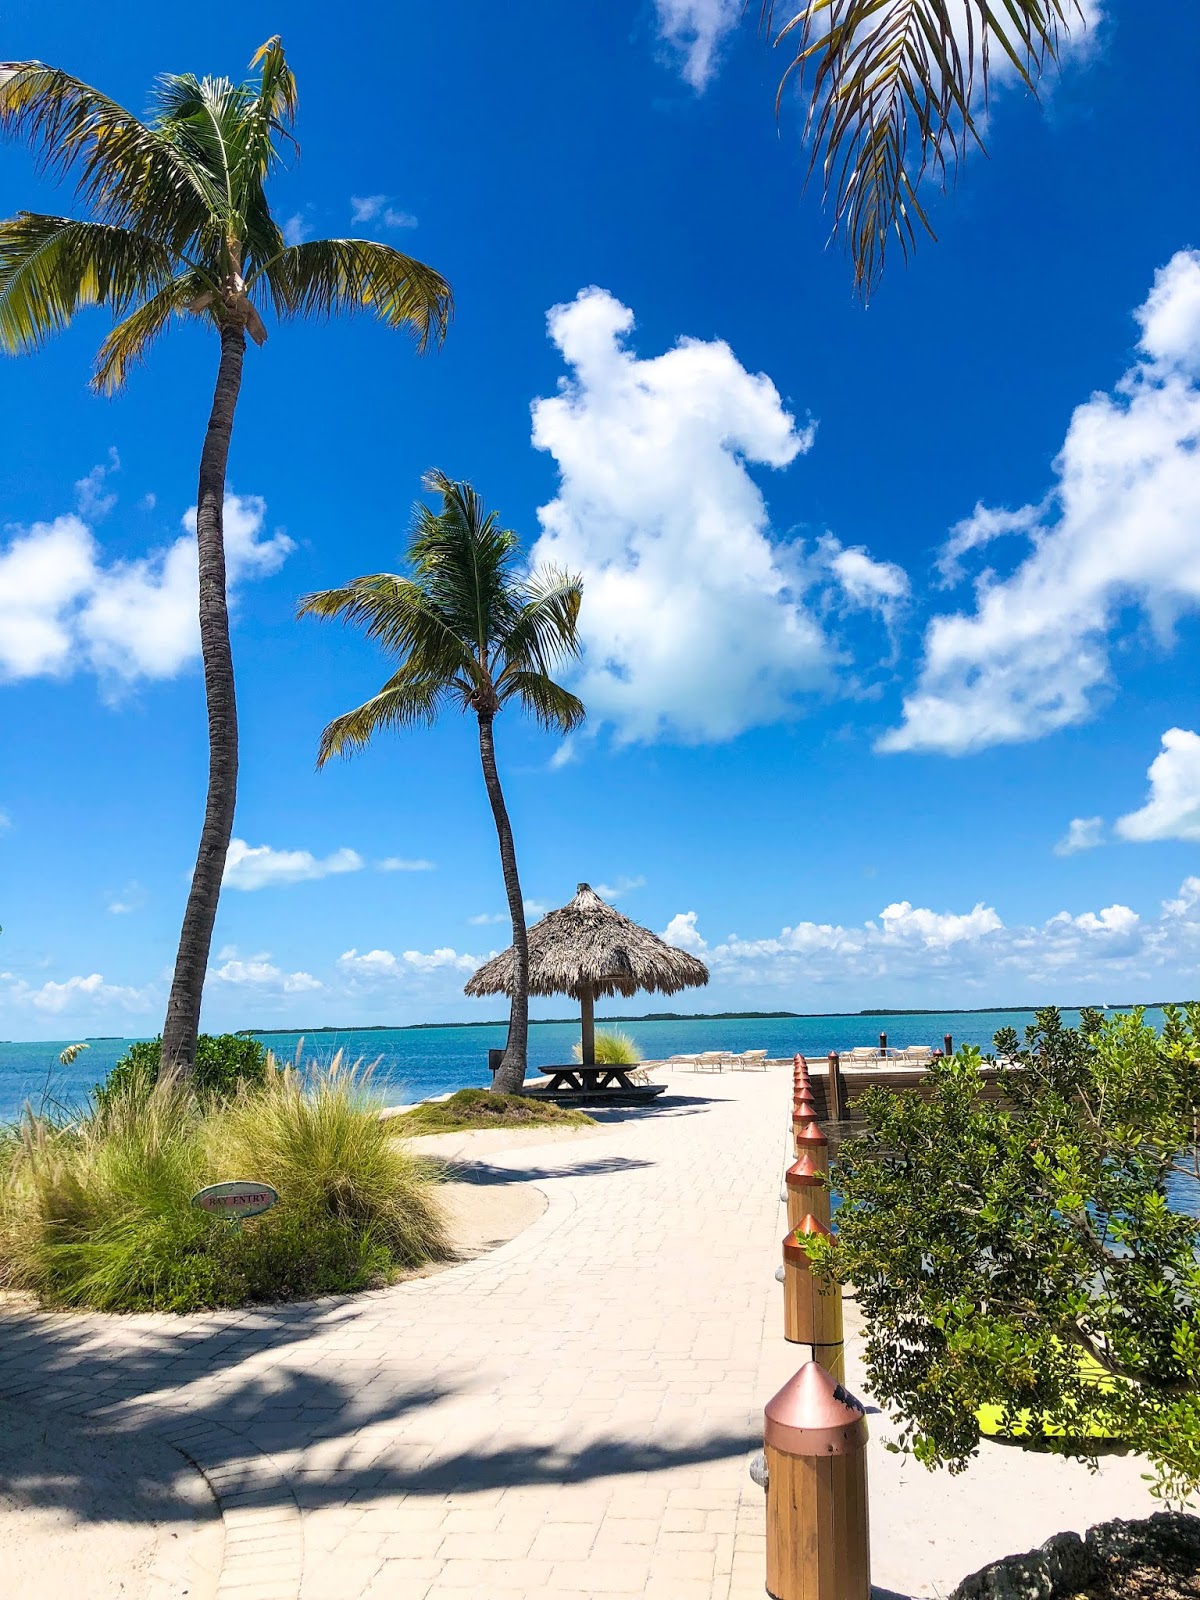 Best Places To Stay In The Florida Keys | TfDiaries